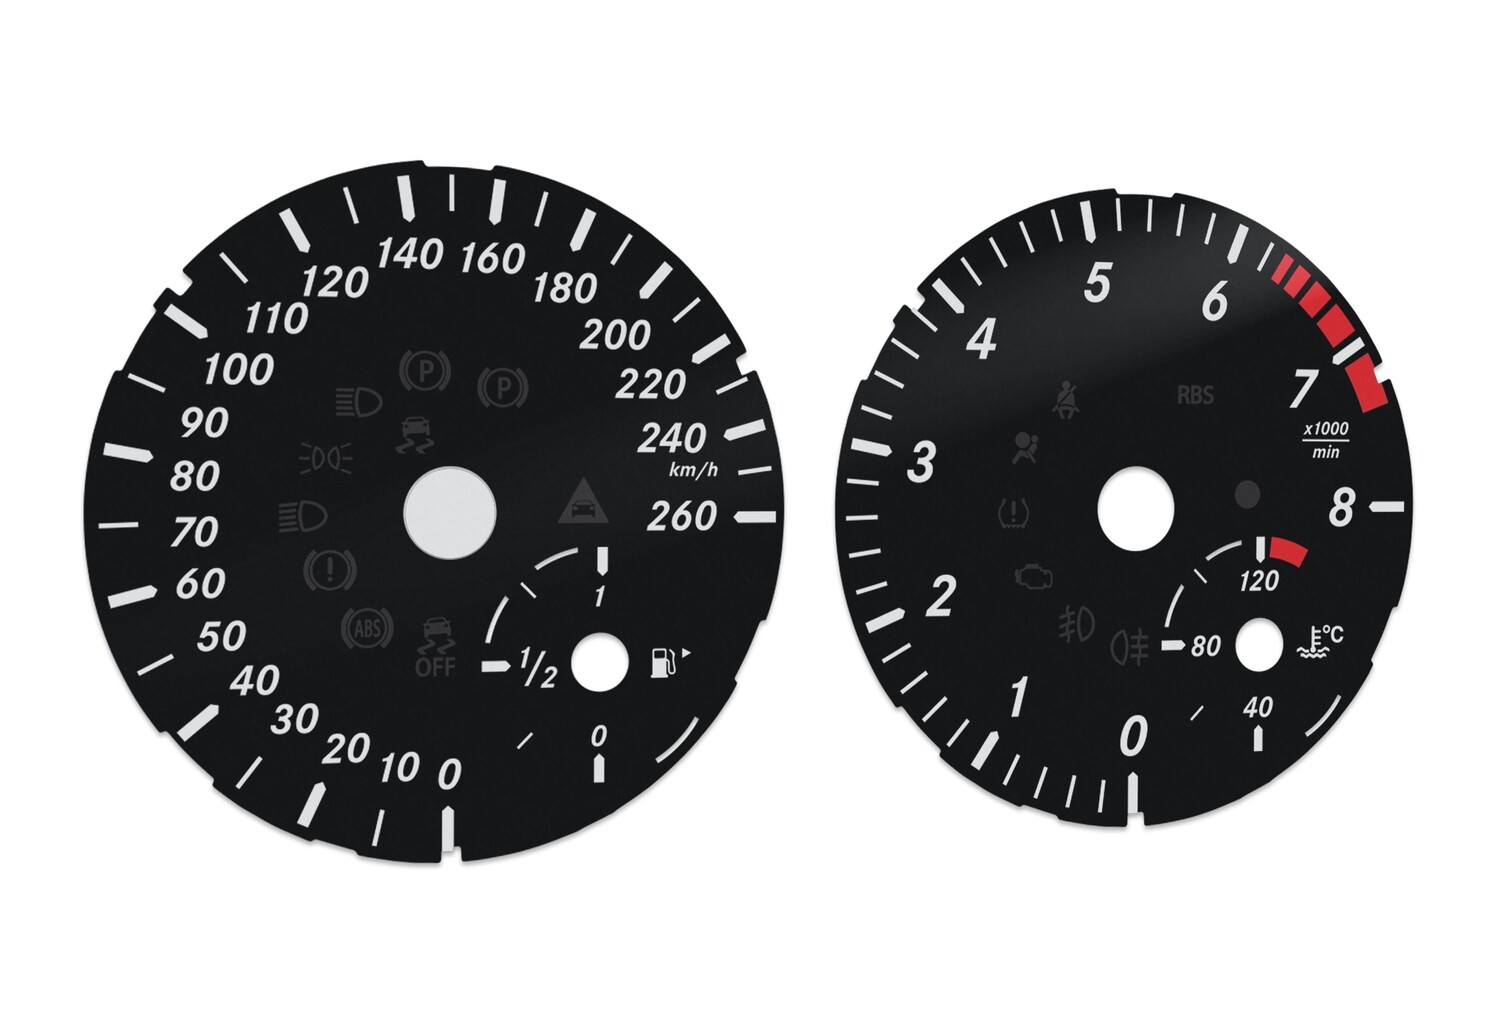 Mercedes-Benz ML, GL - From MPH to km/h conversion dials